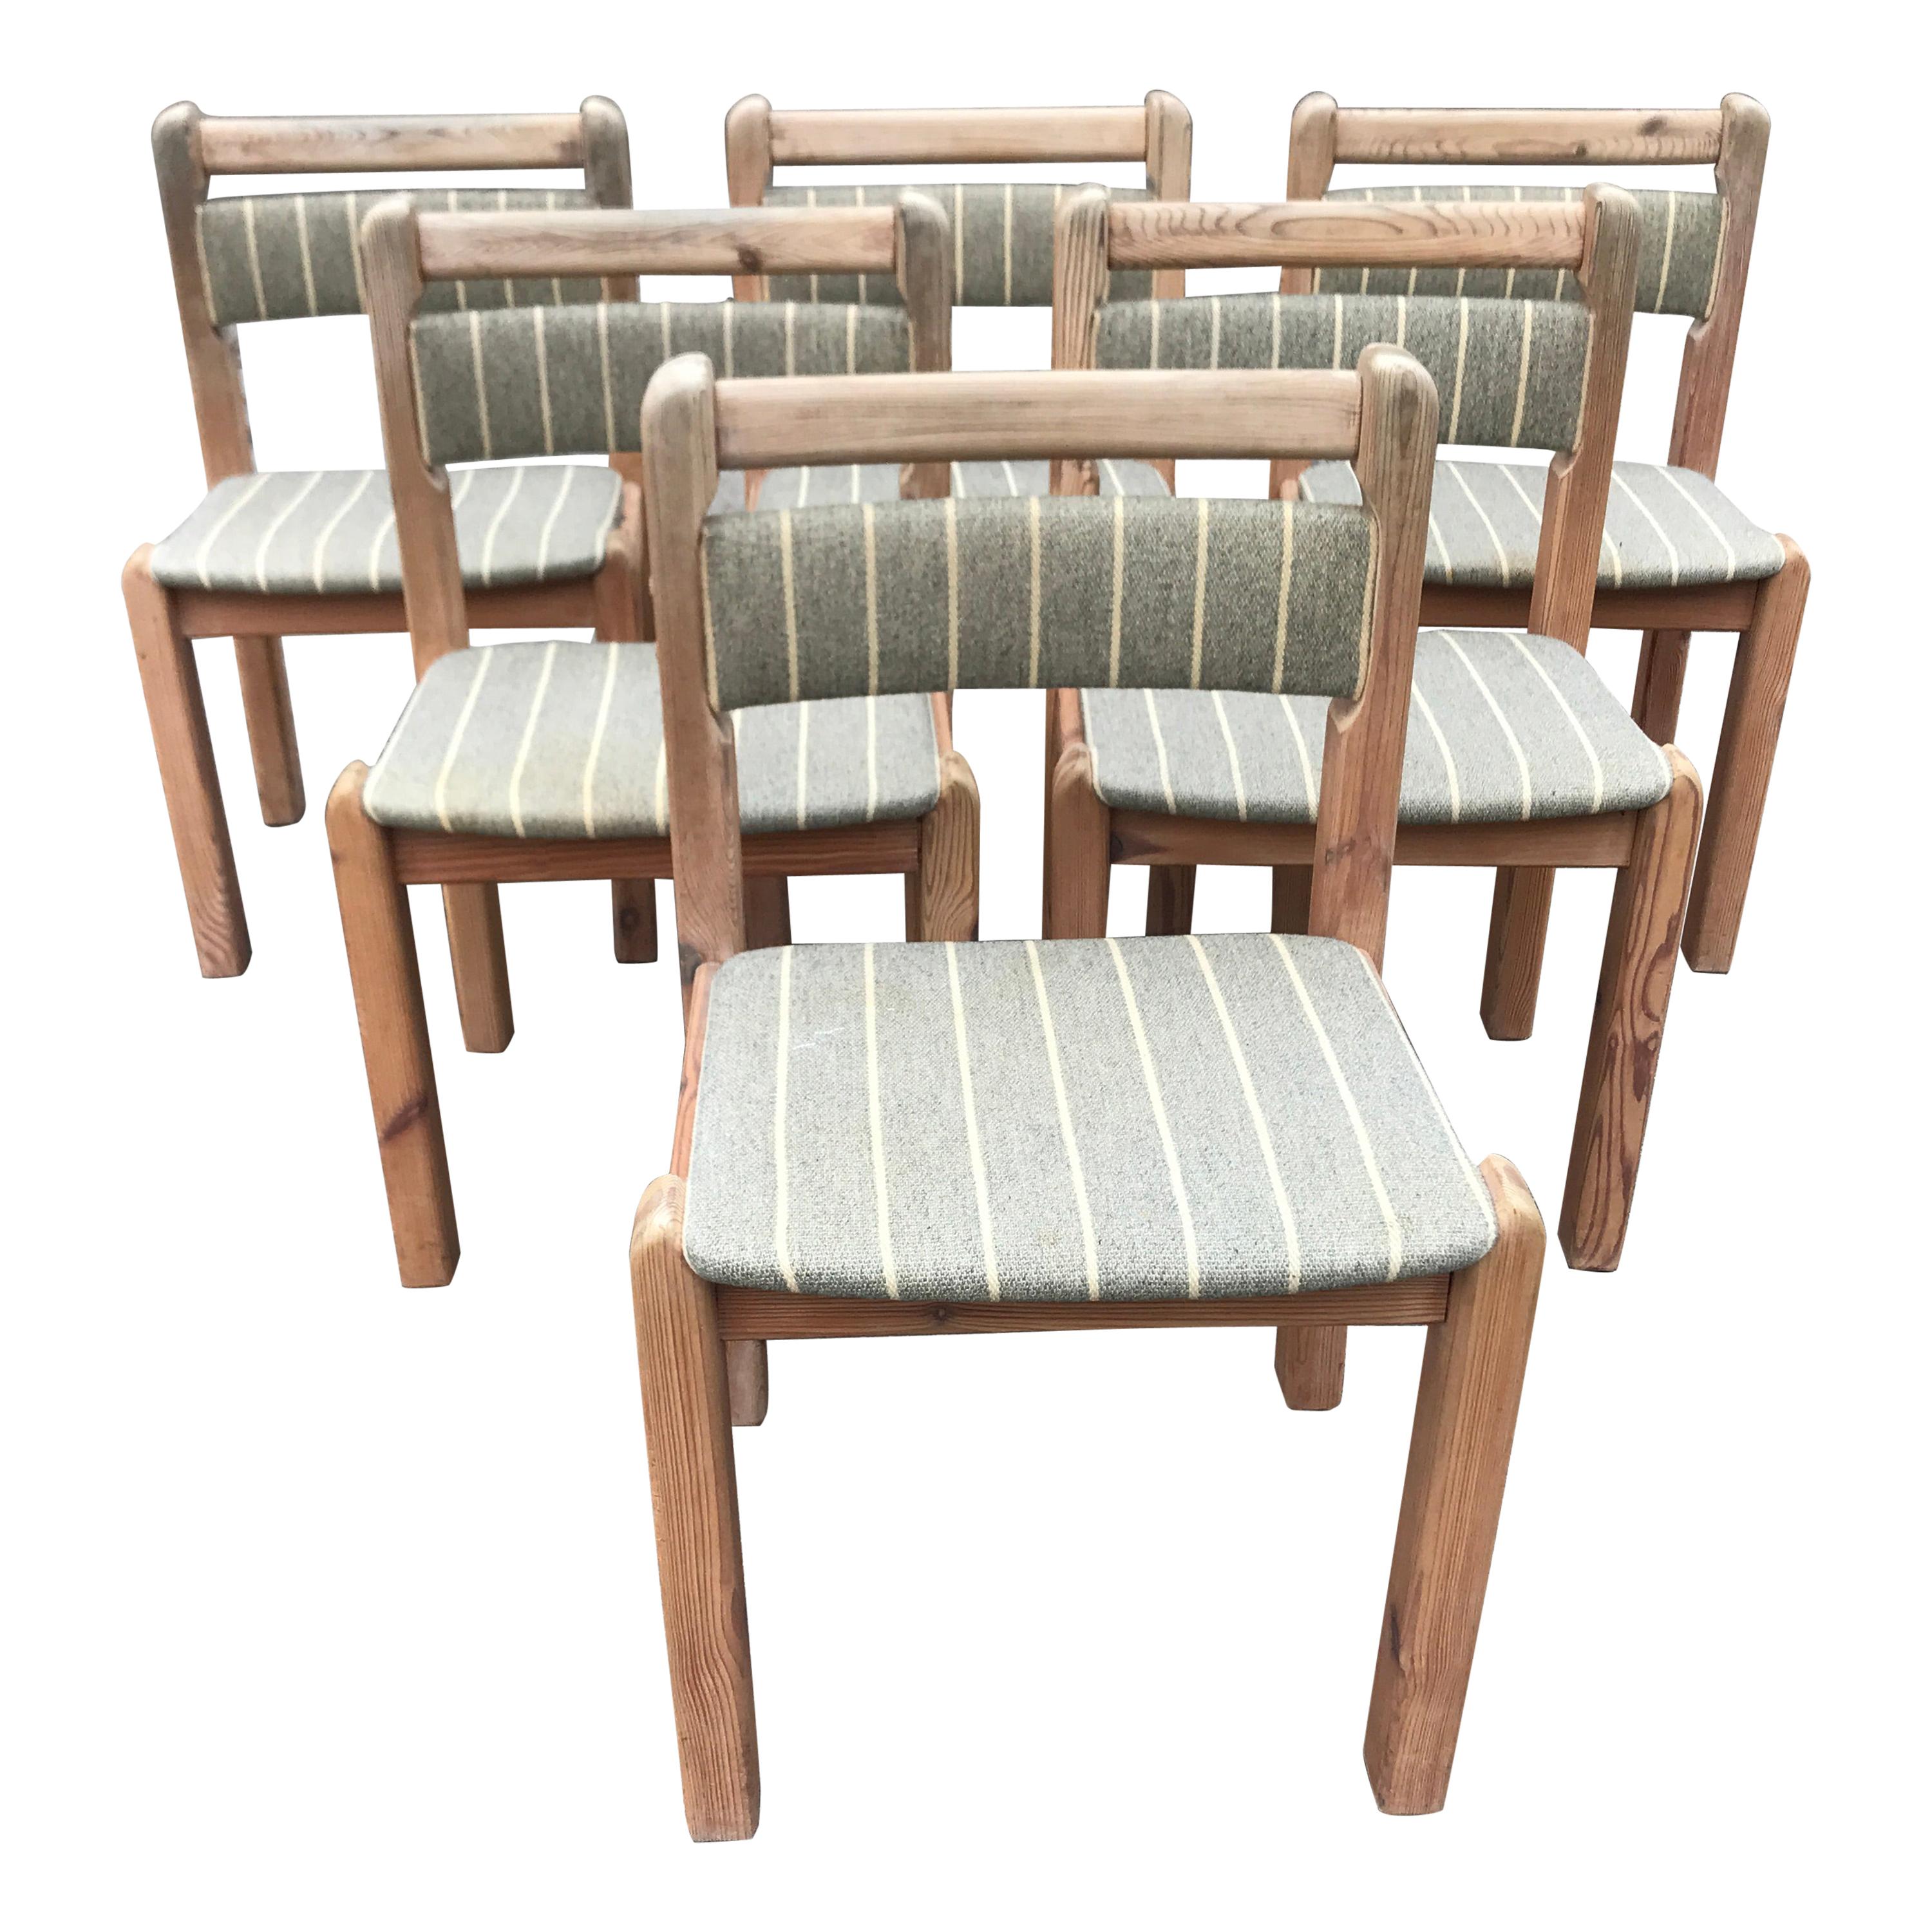 Set of 6 Rustic Dinning Chairs from 1970s